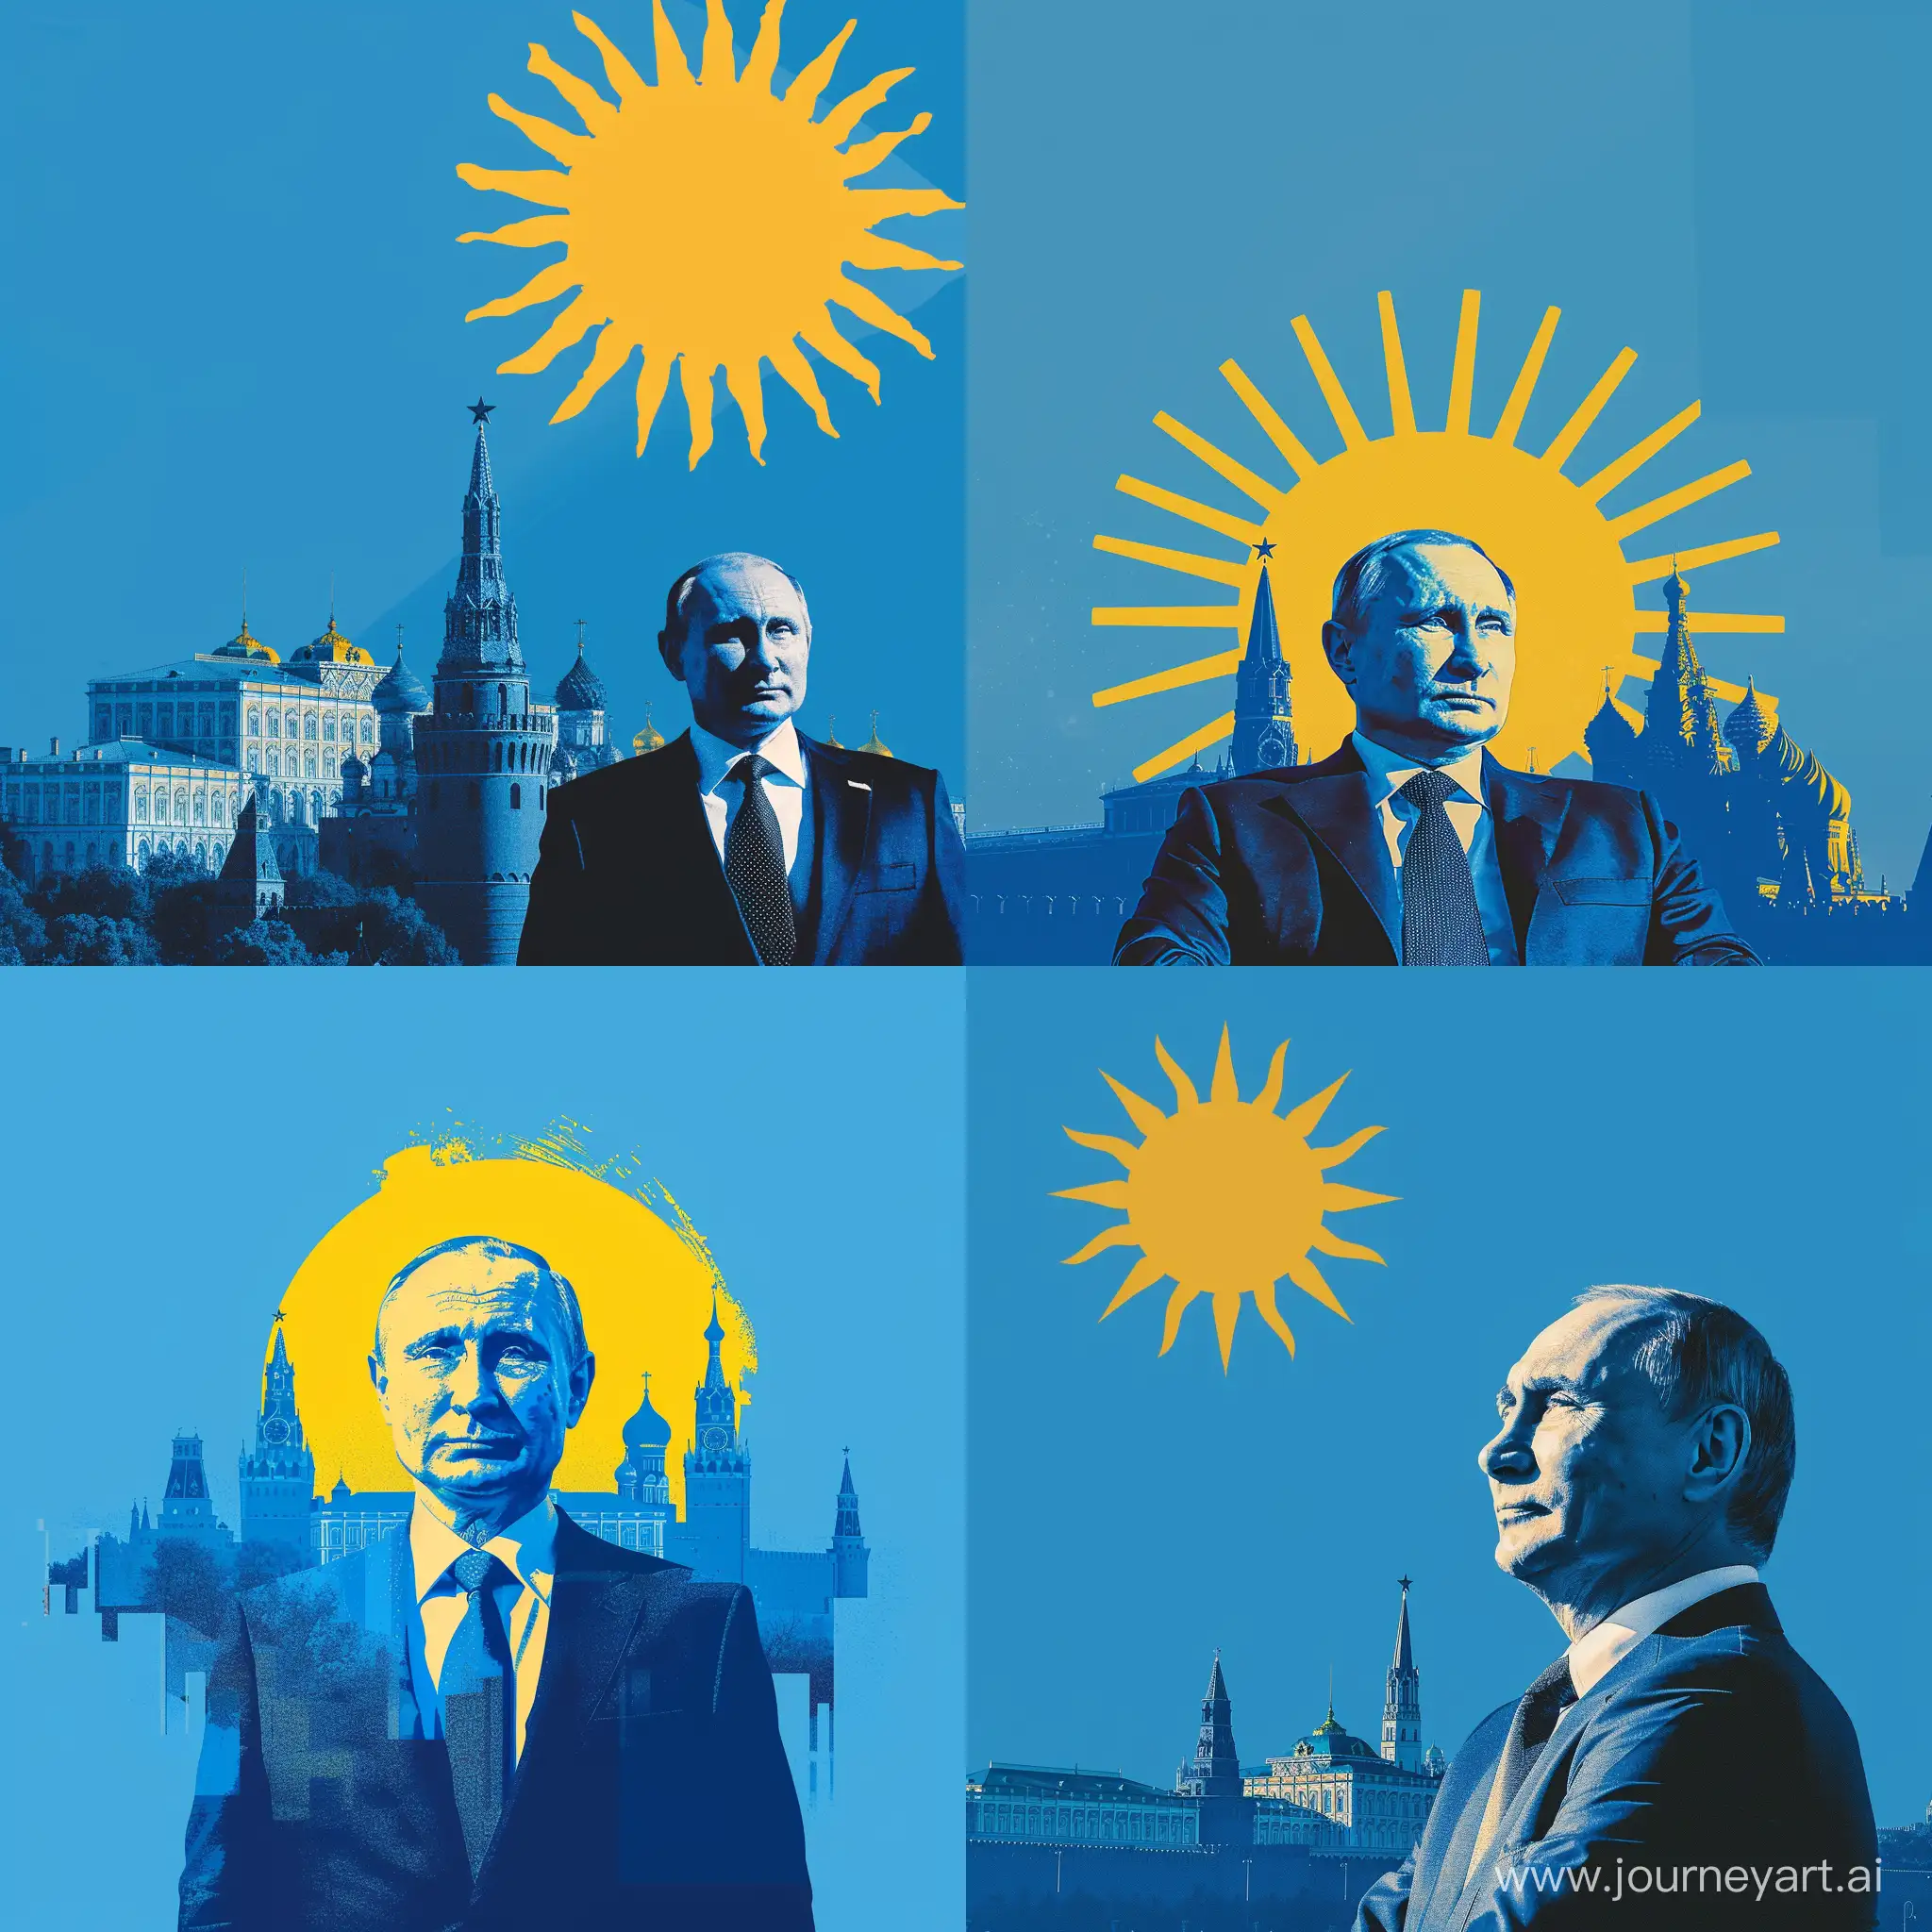 Vladimir-Putin-Standing-Before-Kremlin-and-Moscow-Skyline-with-Blue-Hues-and-Yellow-Sun